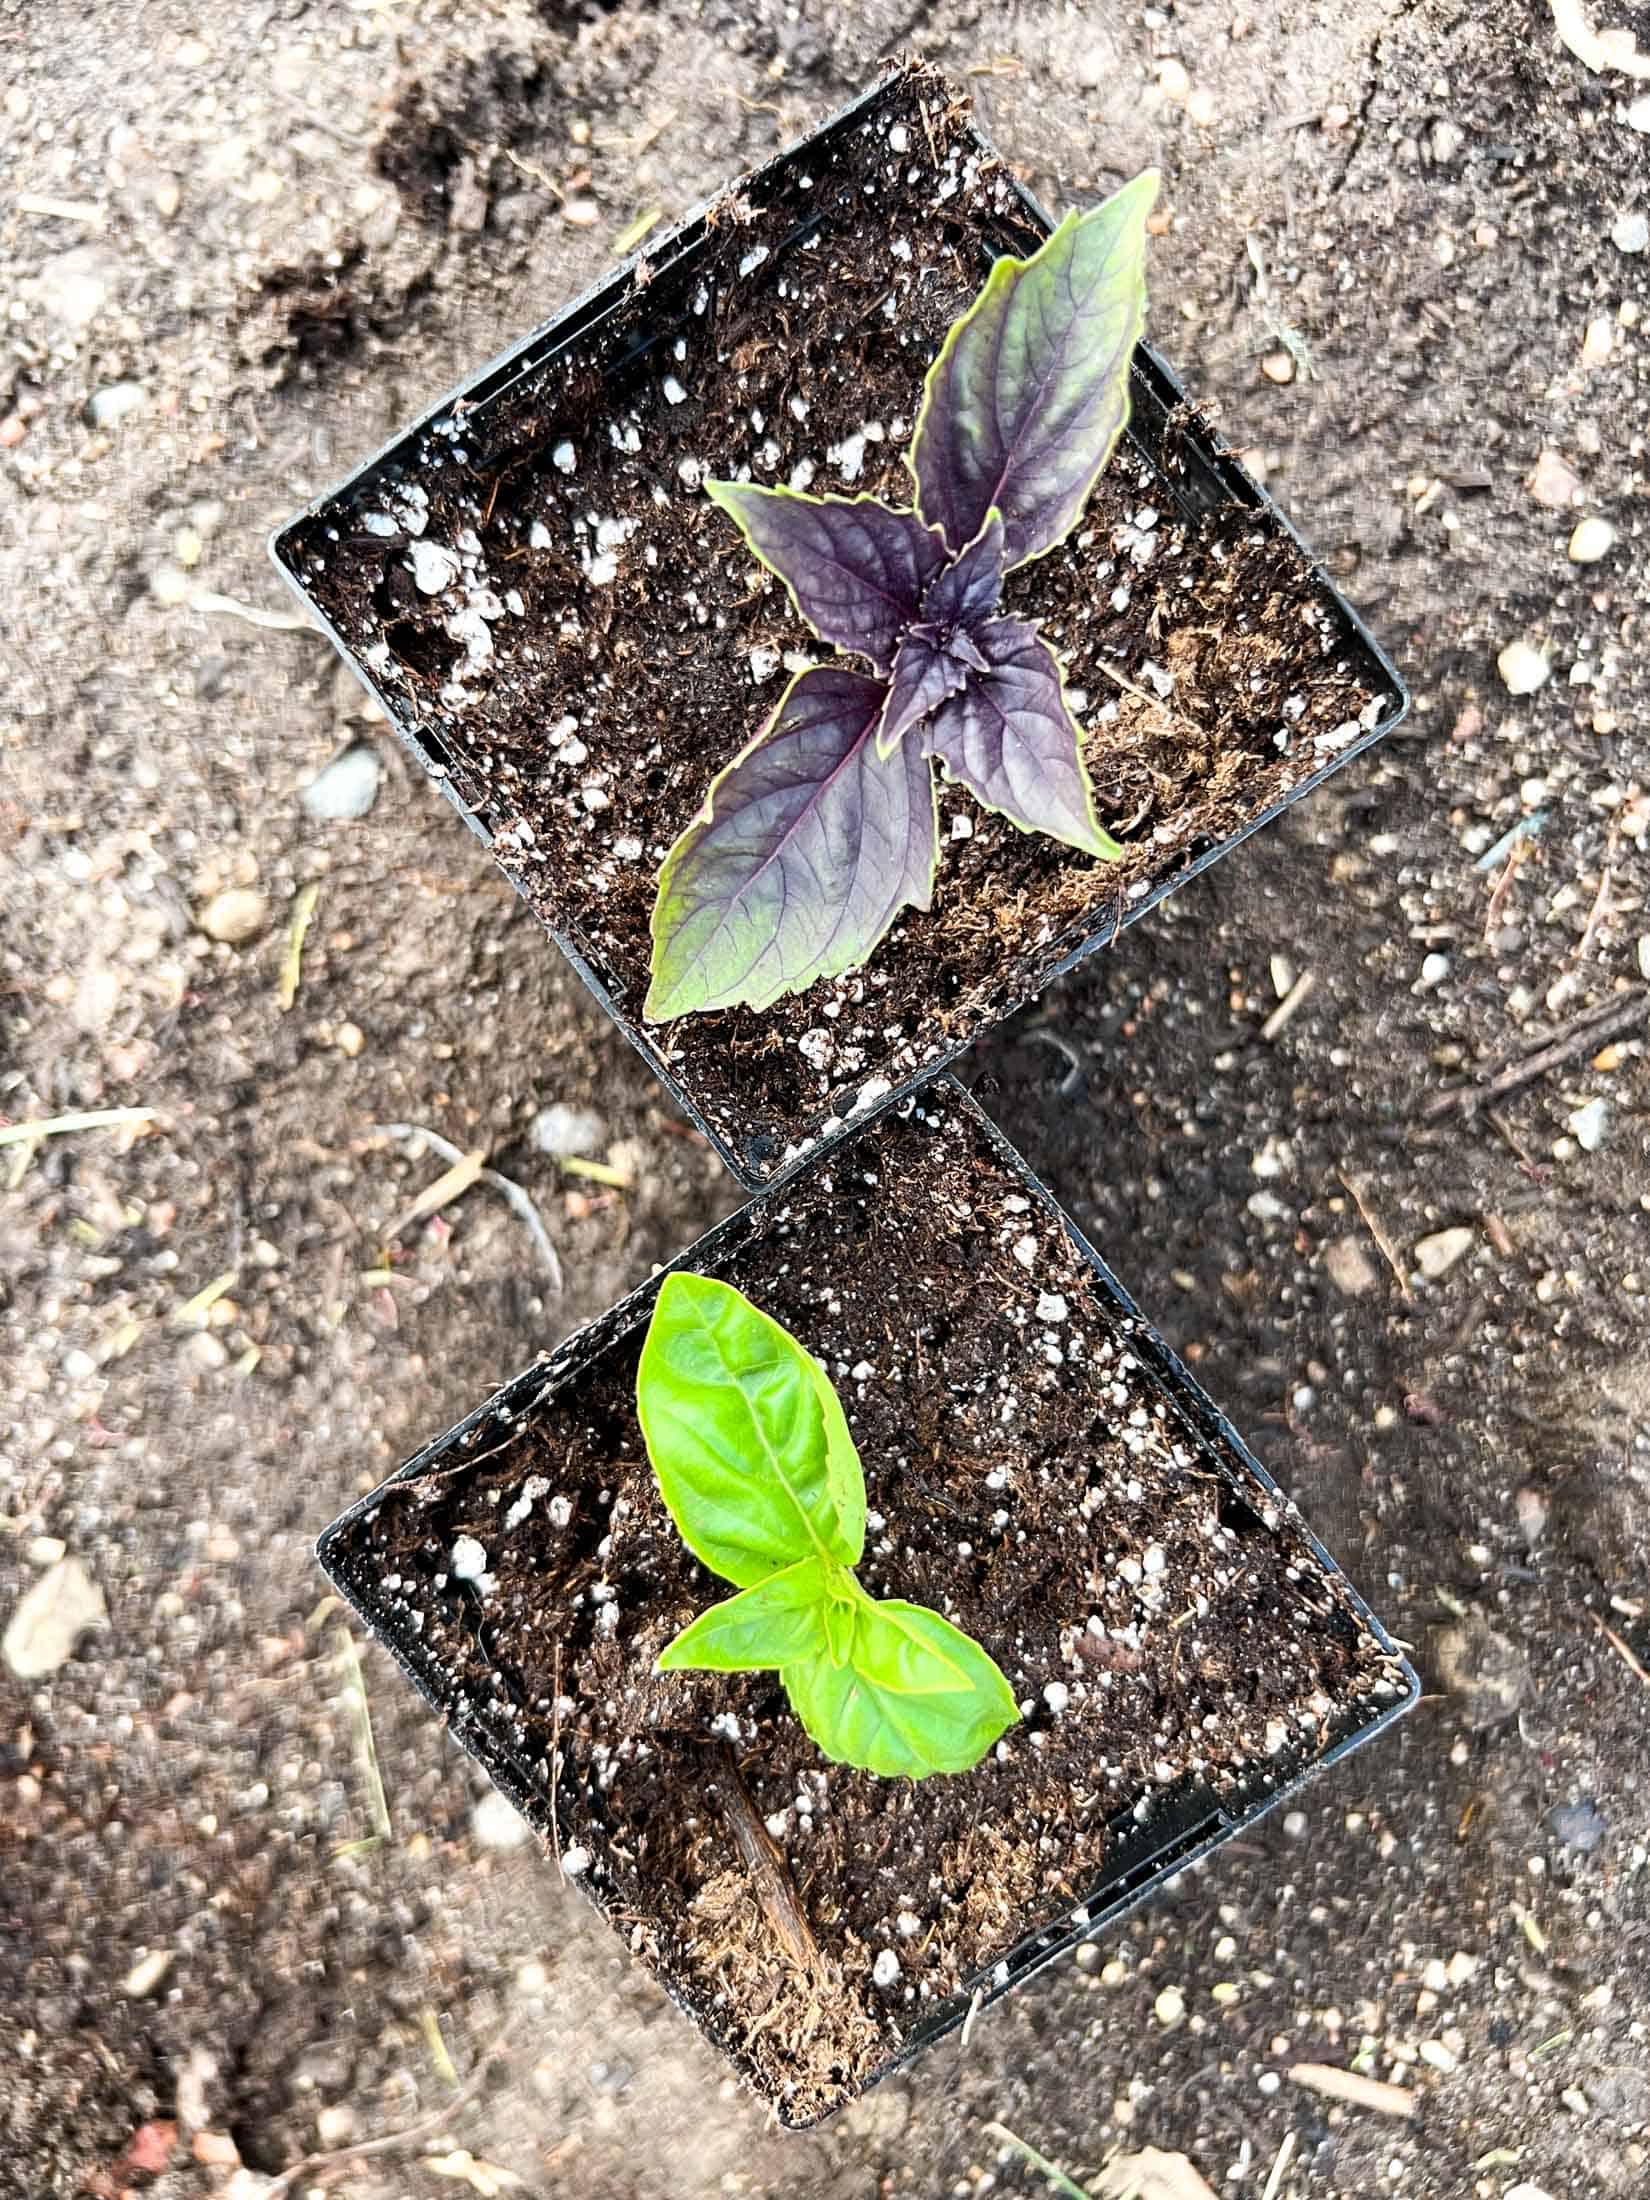 Dolce fresca basil and rosie basil cuttings propagated in soil.